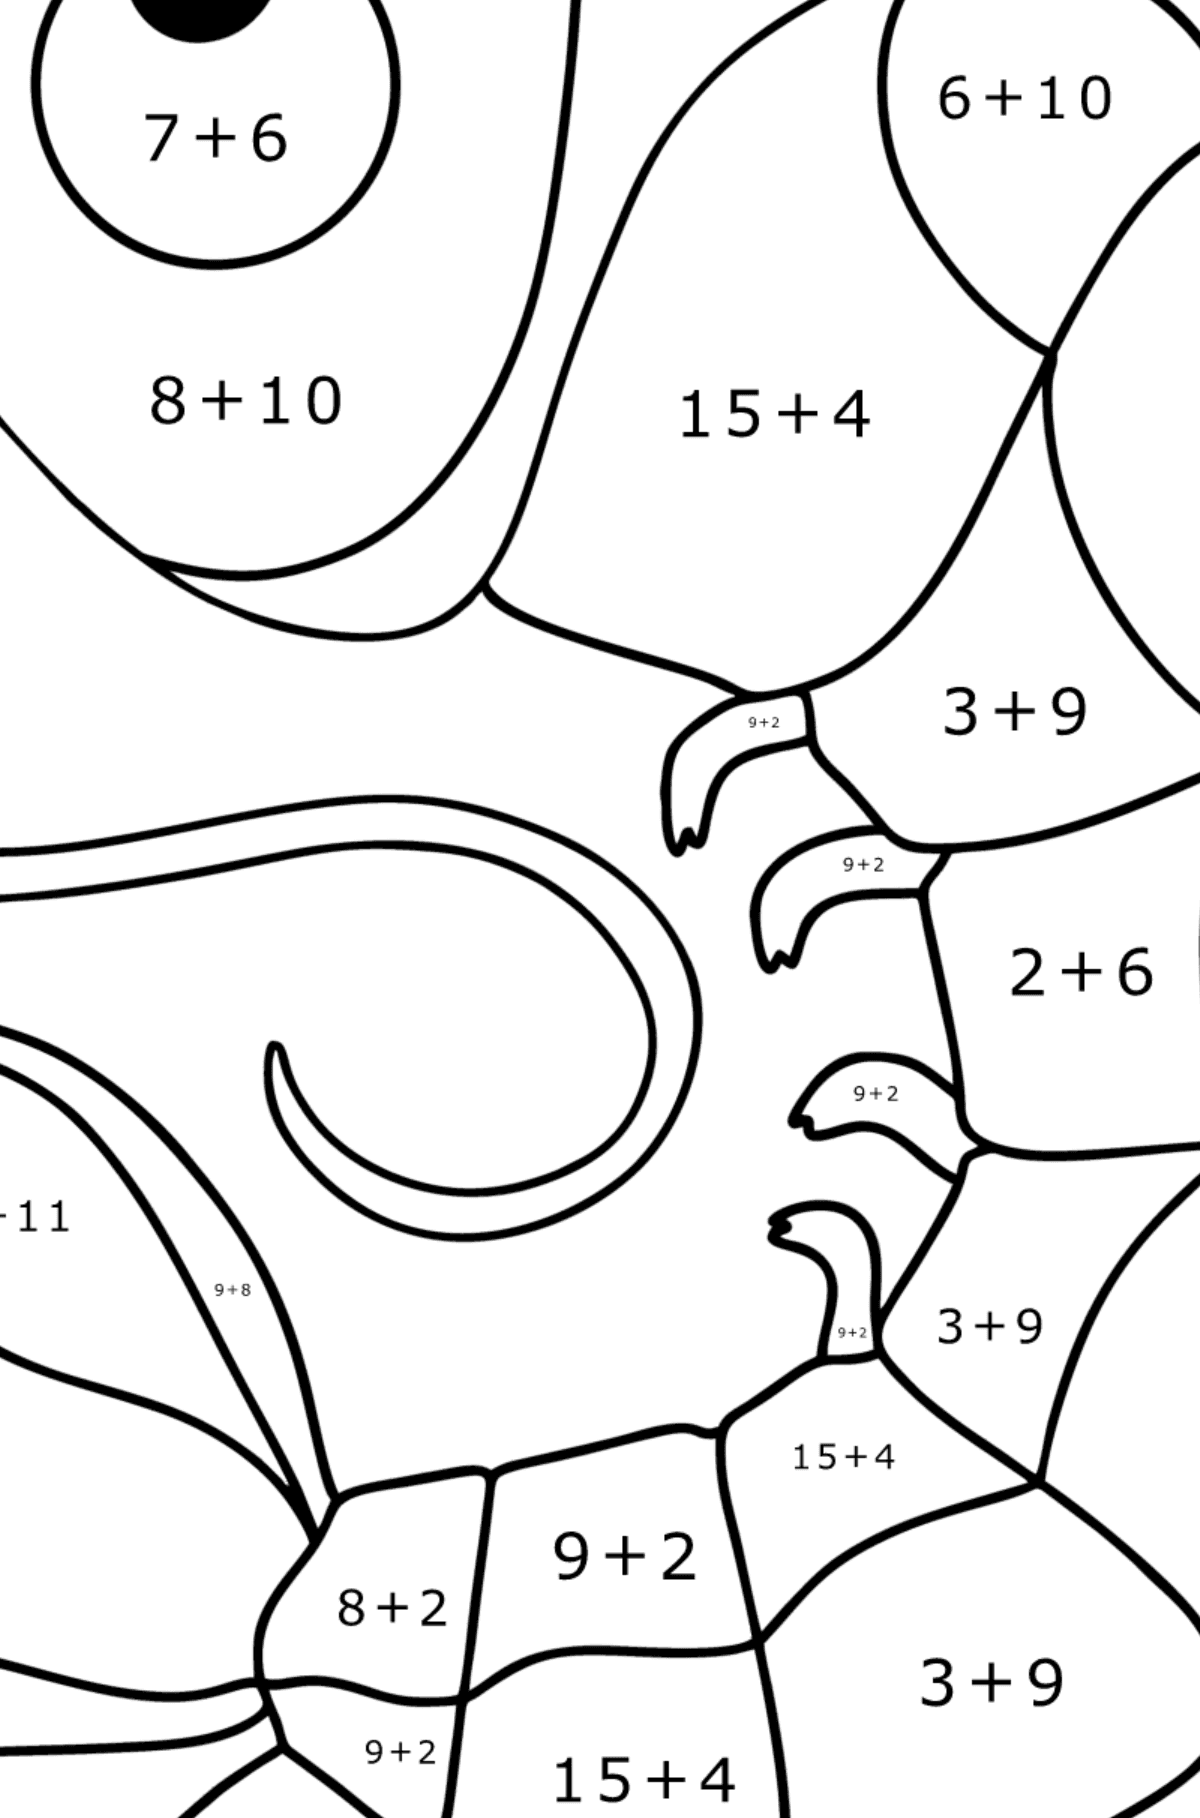 Shrimp coloring page - Math Coloring - Addition for Kids